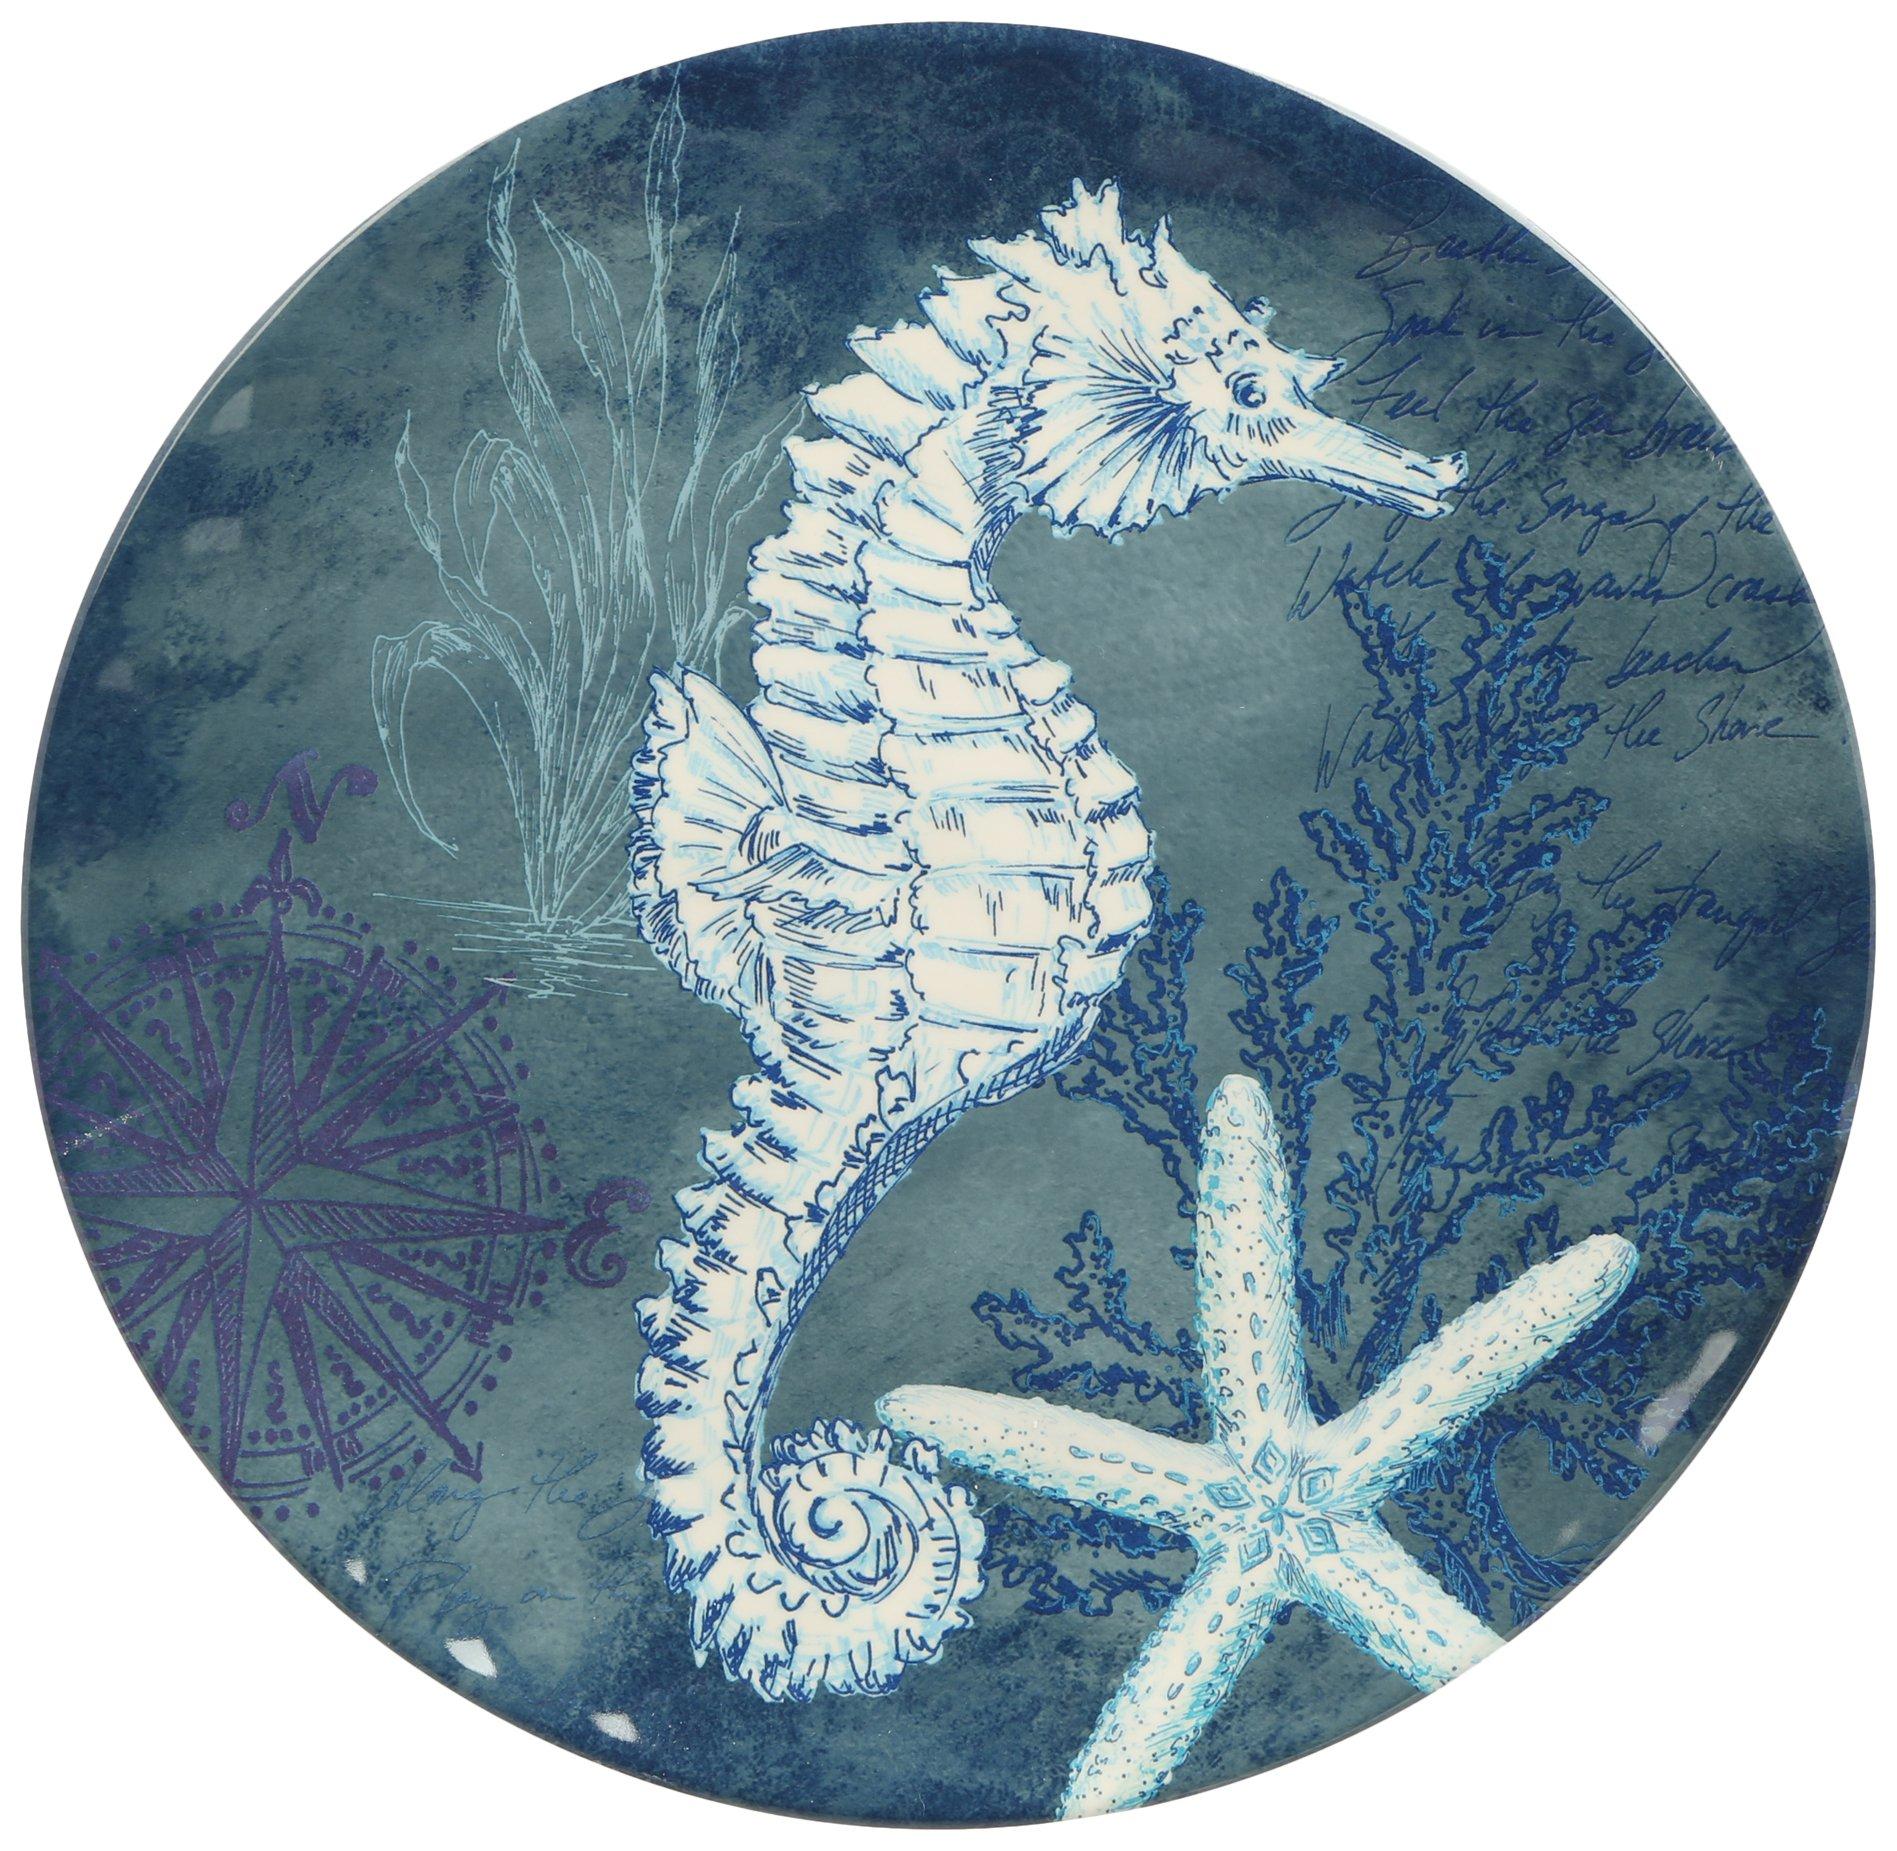 Seahorse Serving Plate